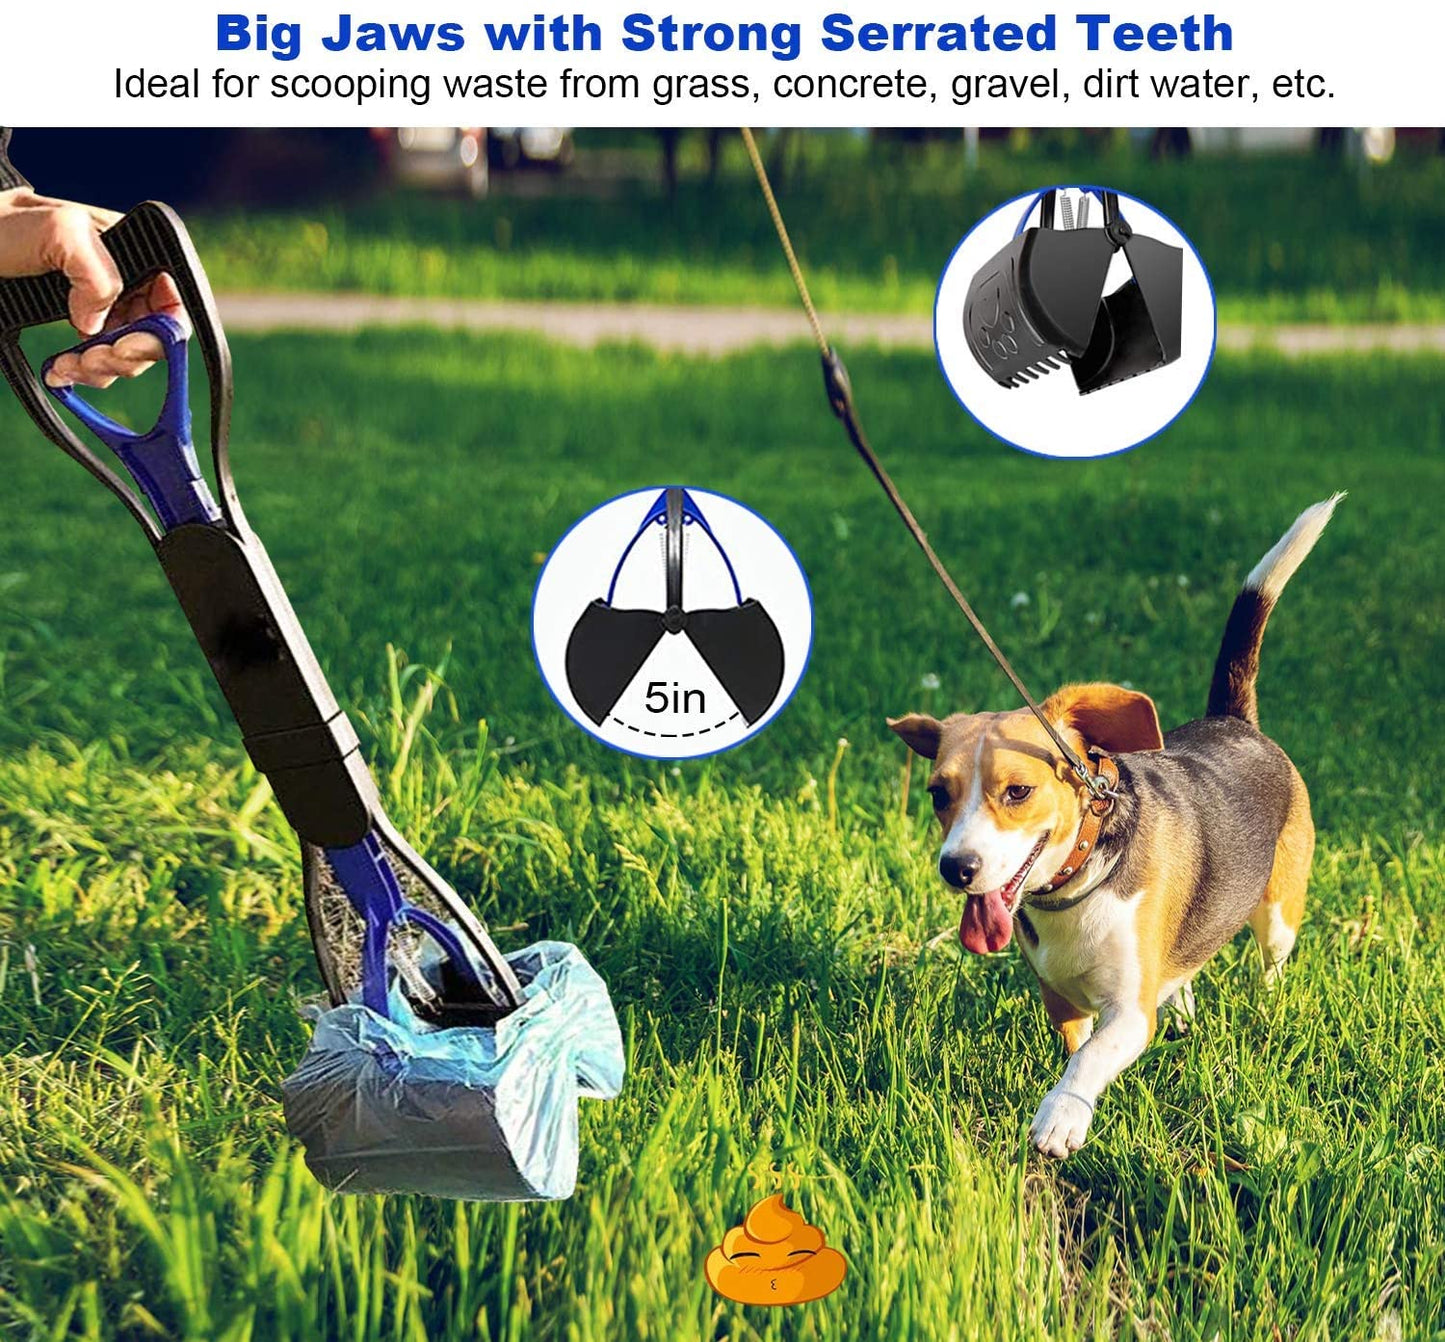 Long Handle Portable Pet Pooper Scooper for Dogs,Non-Breakable Pet Pooper Scooper with High Strength Durable Spring,Easy to Use for Lawns, Grass, etc